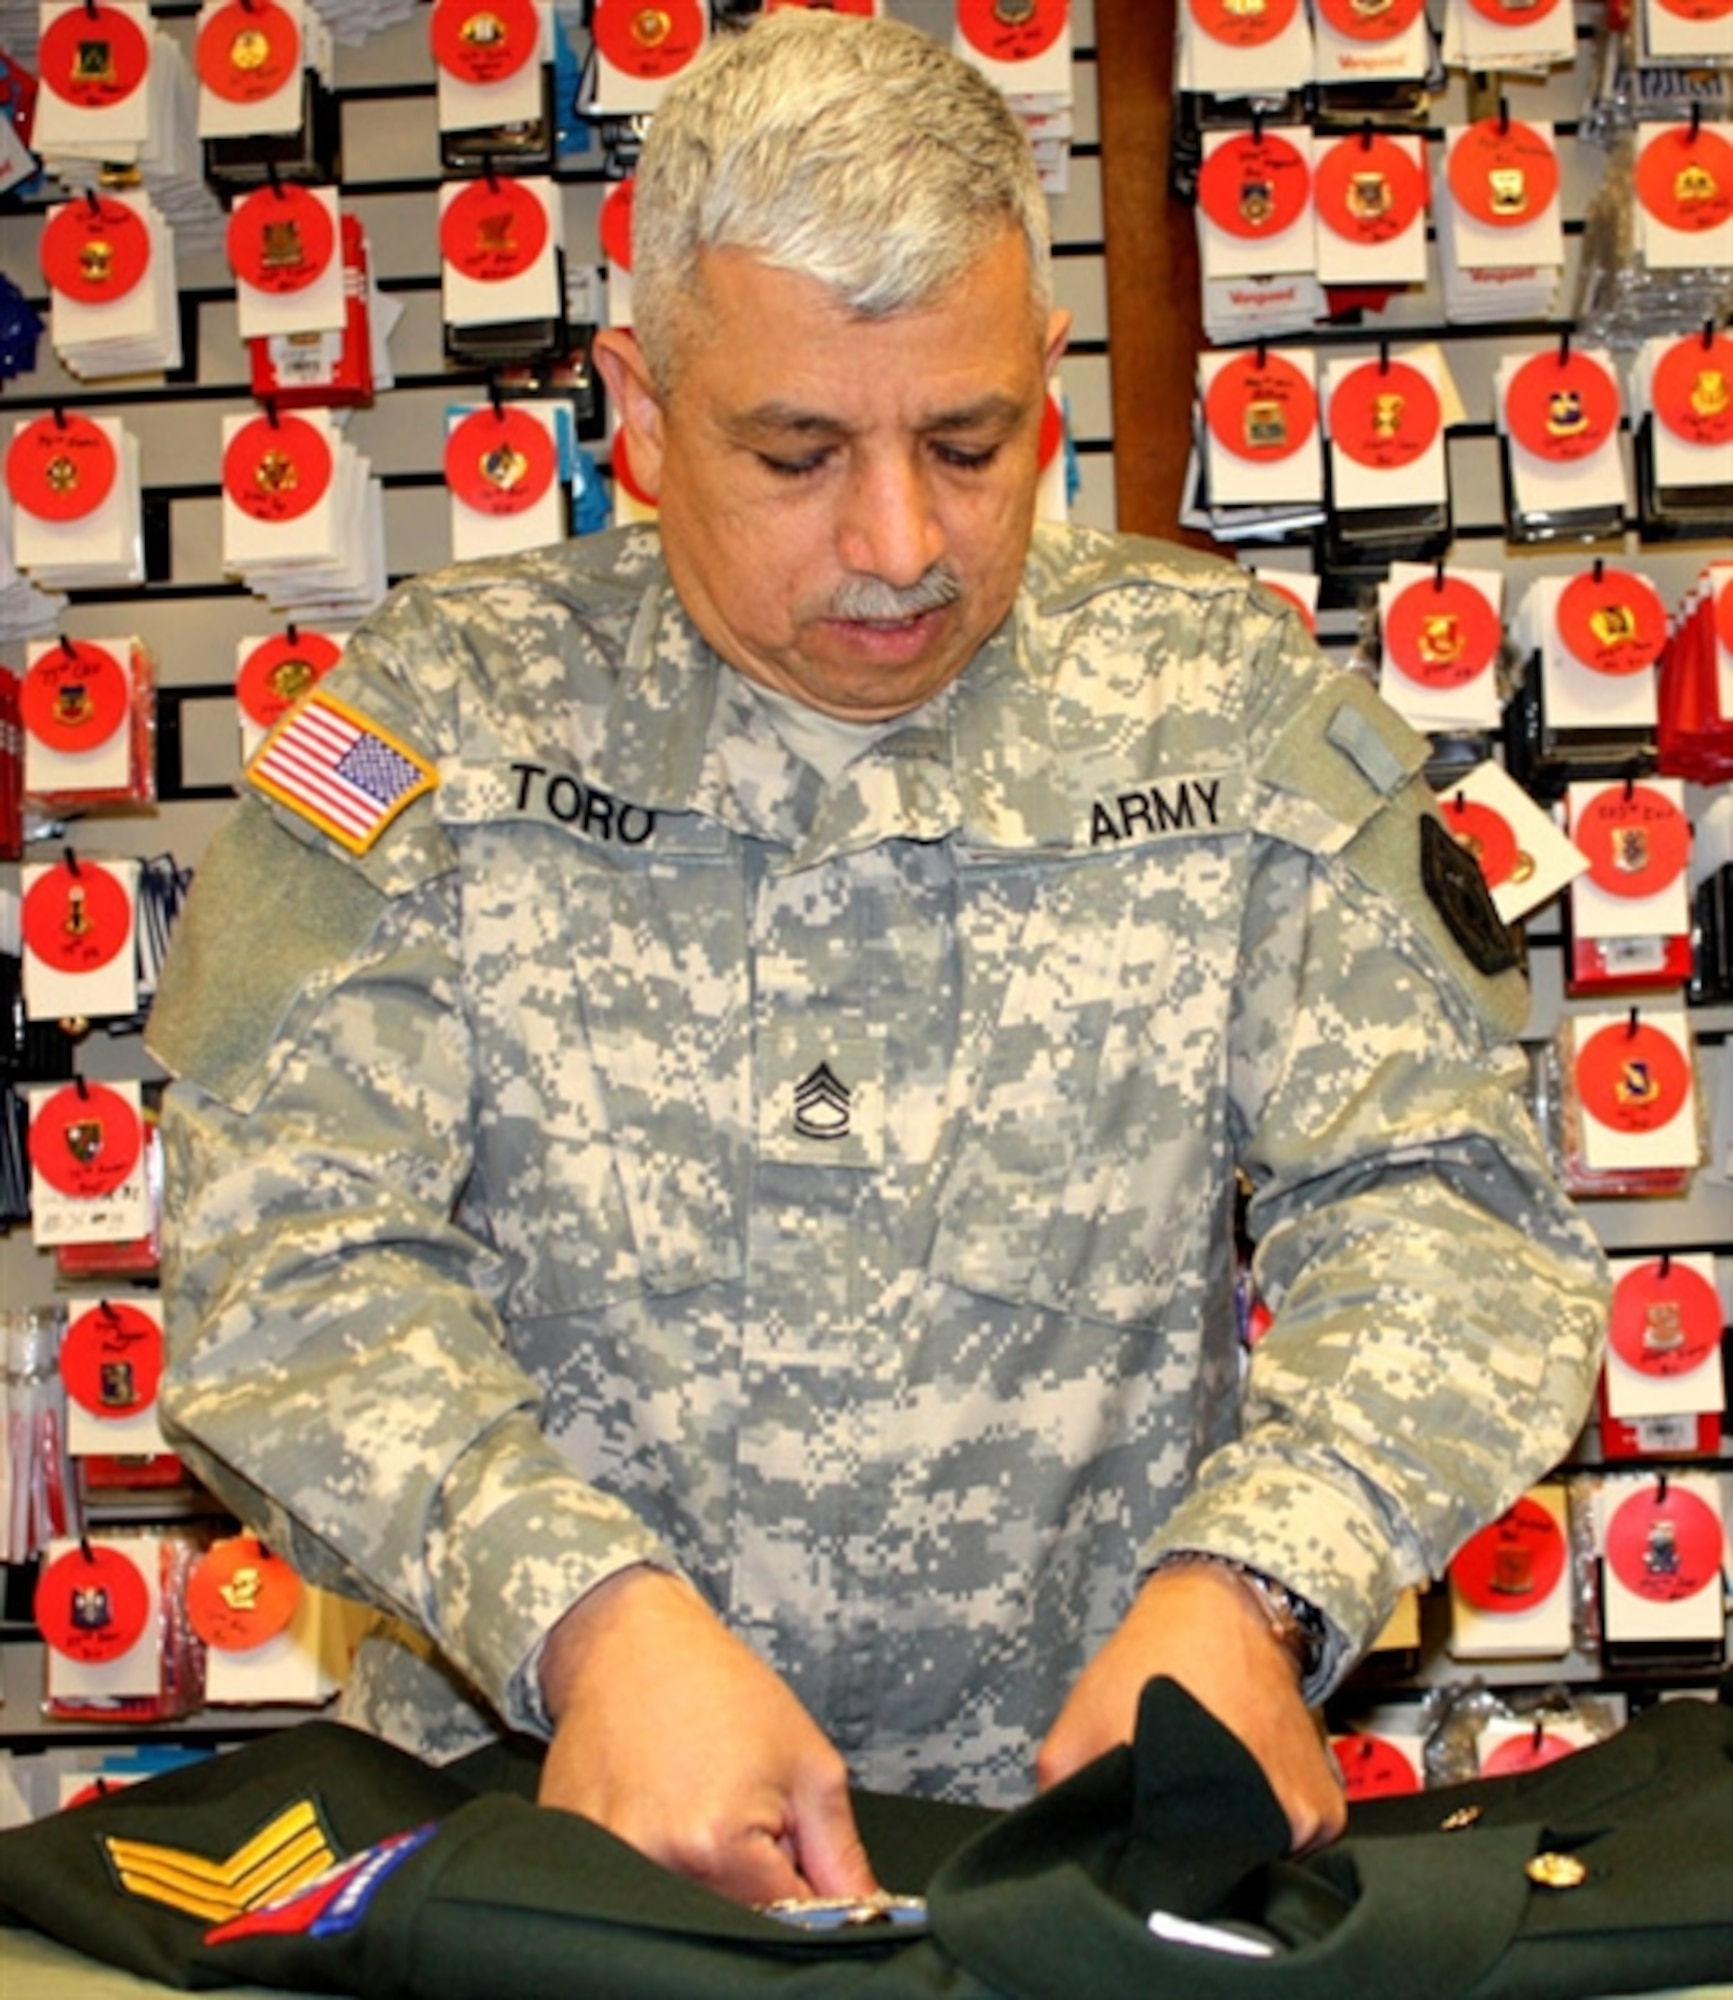 Army Sgt. 1st Class Jimmy Toro clips a ribbon rack onto a new dress uniform at the uniform shop of the Air Force Mortuary Affairs Operations Center at Dover Air Force Base, Del., Feb. 23. Toro prepares uniforms for fallen soldiers’ remains. (DoD photo by Elaine Wilson)  